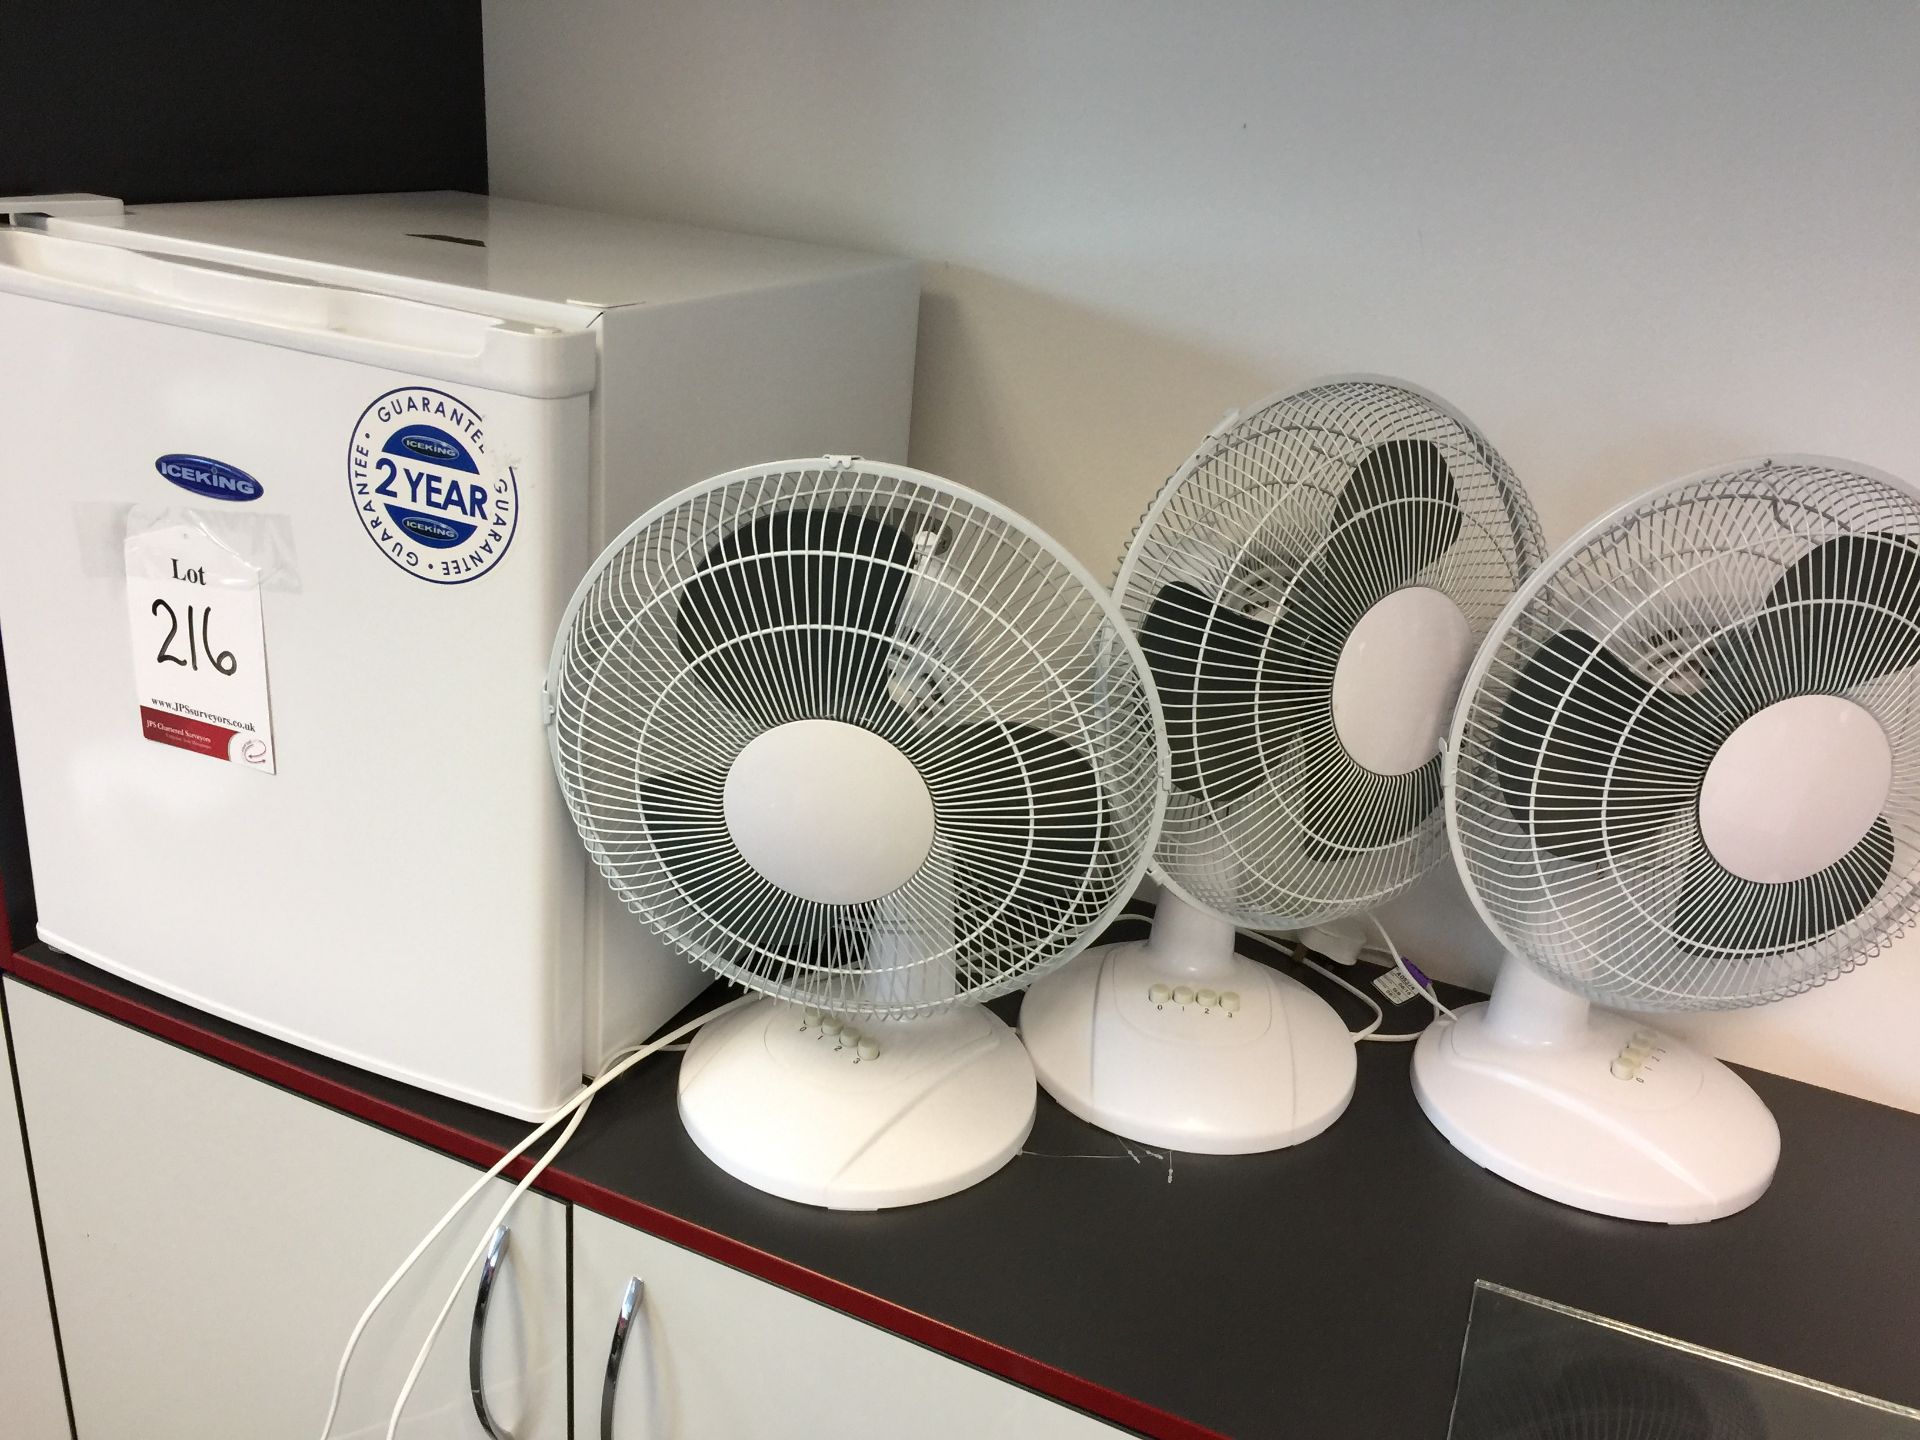 IceKing table top fridge and 4 fans